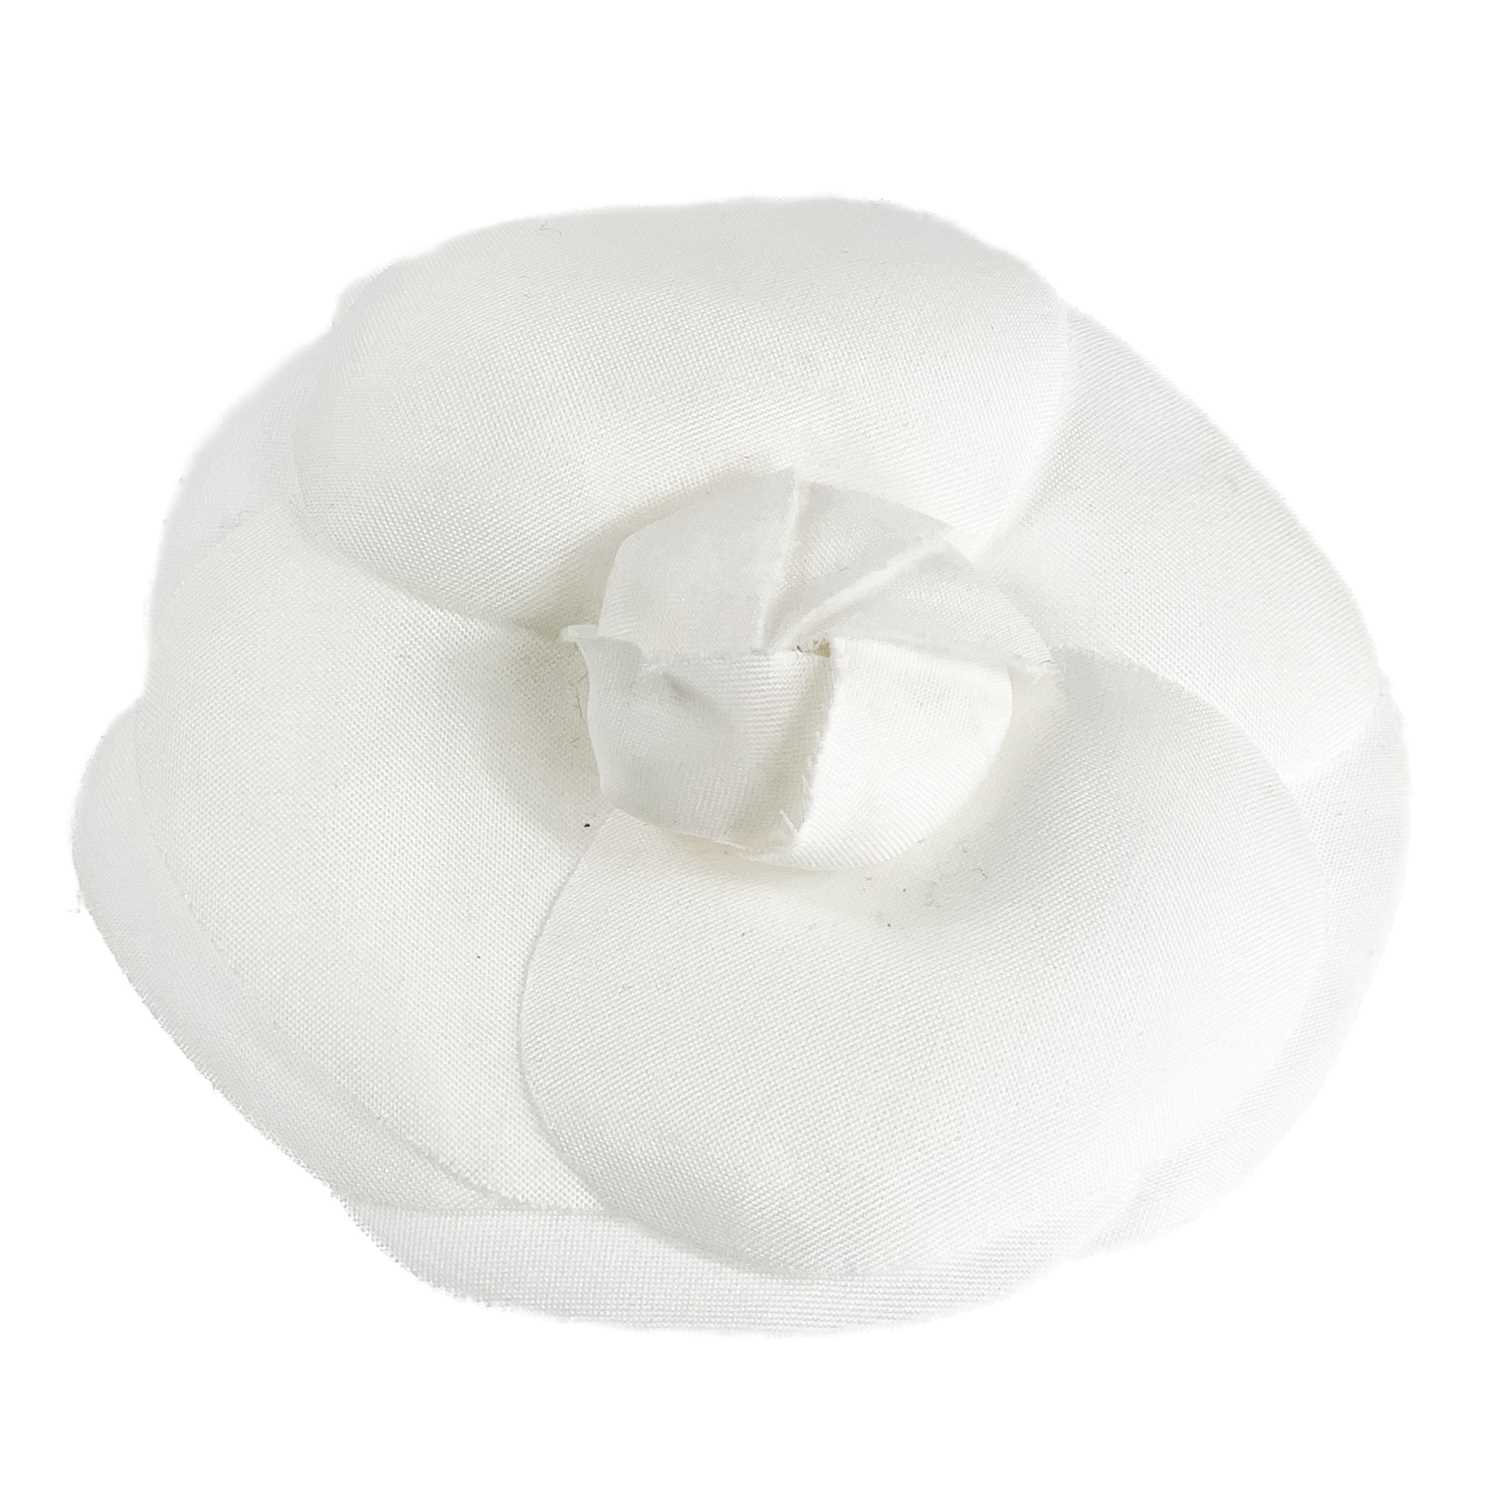 Two 1980s Chanel camellia fabric flower brooches. - Image 3 of 4